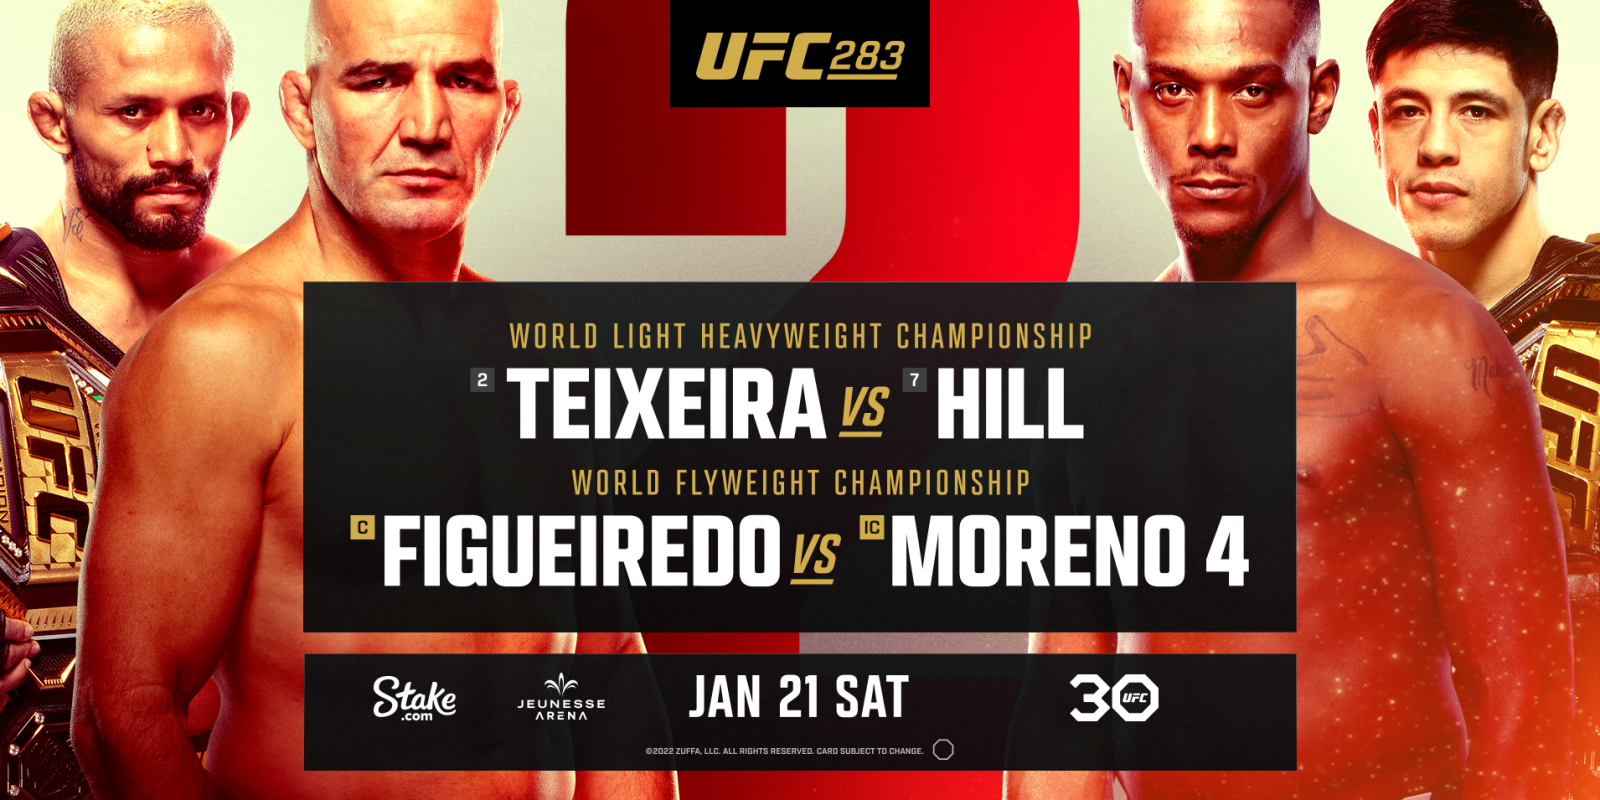 UFC 283: Teixeira vs Hill - MMA Streams Live, How to Watch Online, Time, Fight Card